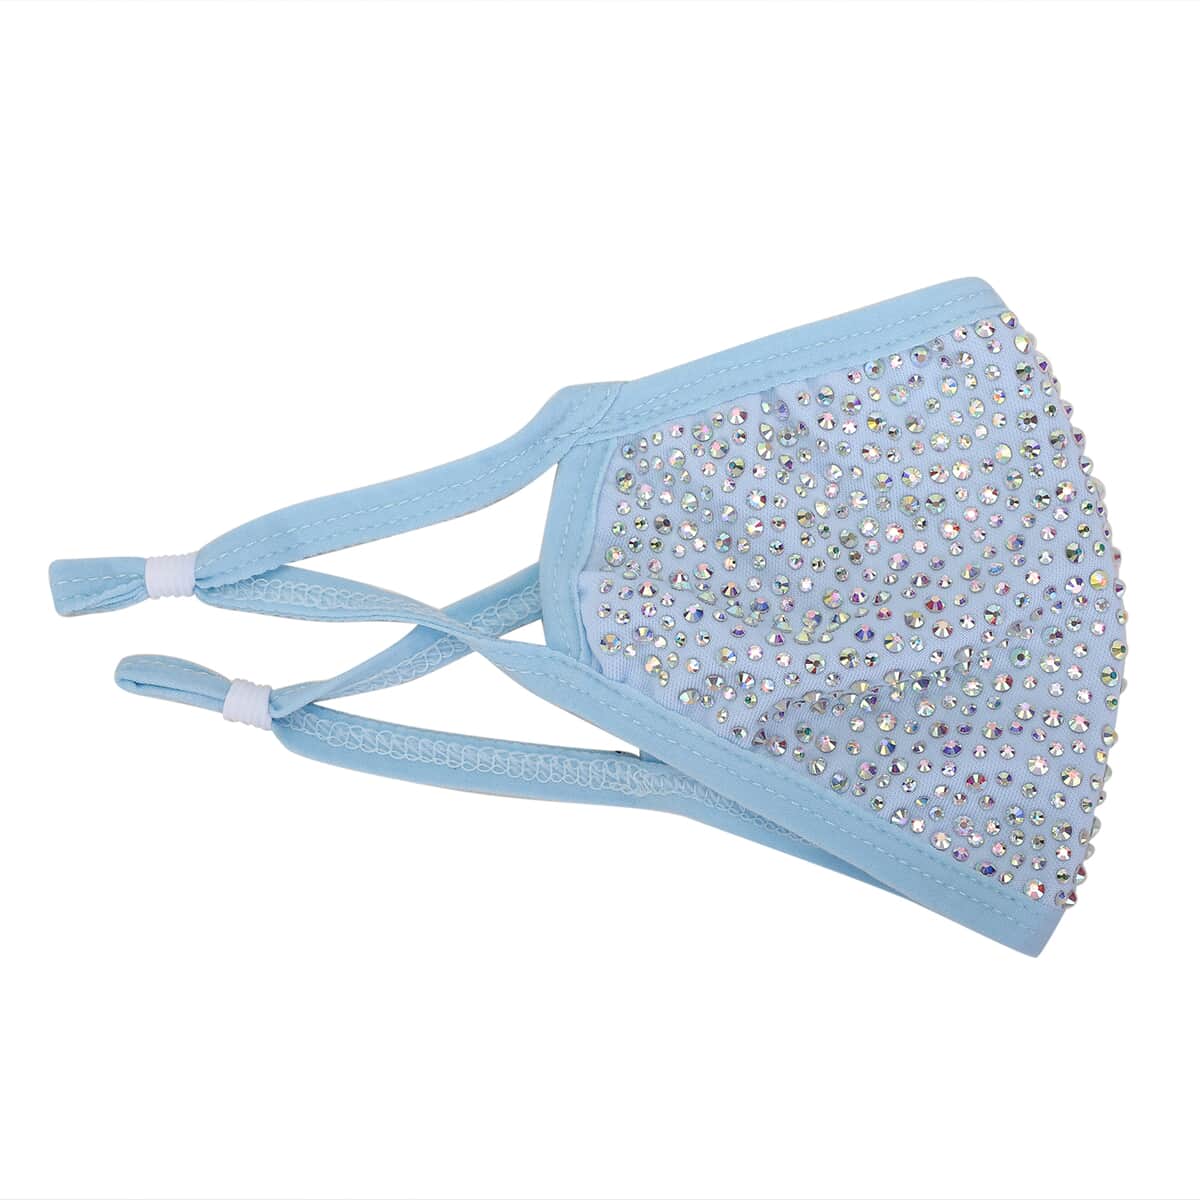 Sky Blue with Sparkling Crystal Rhinestone 2 Ply Fashion Mask (Non-Returnable) image number 1